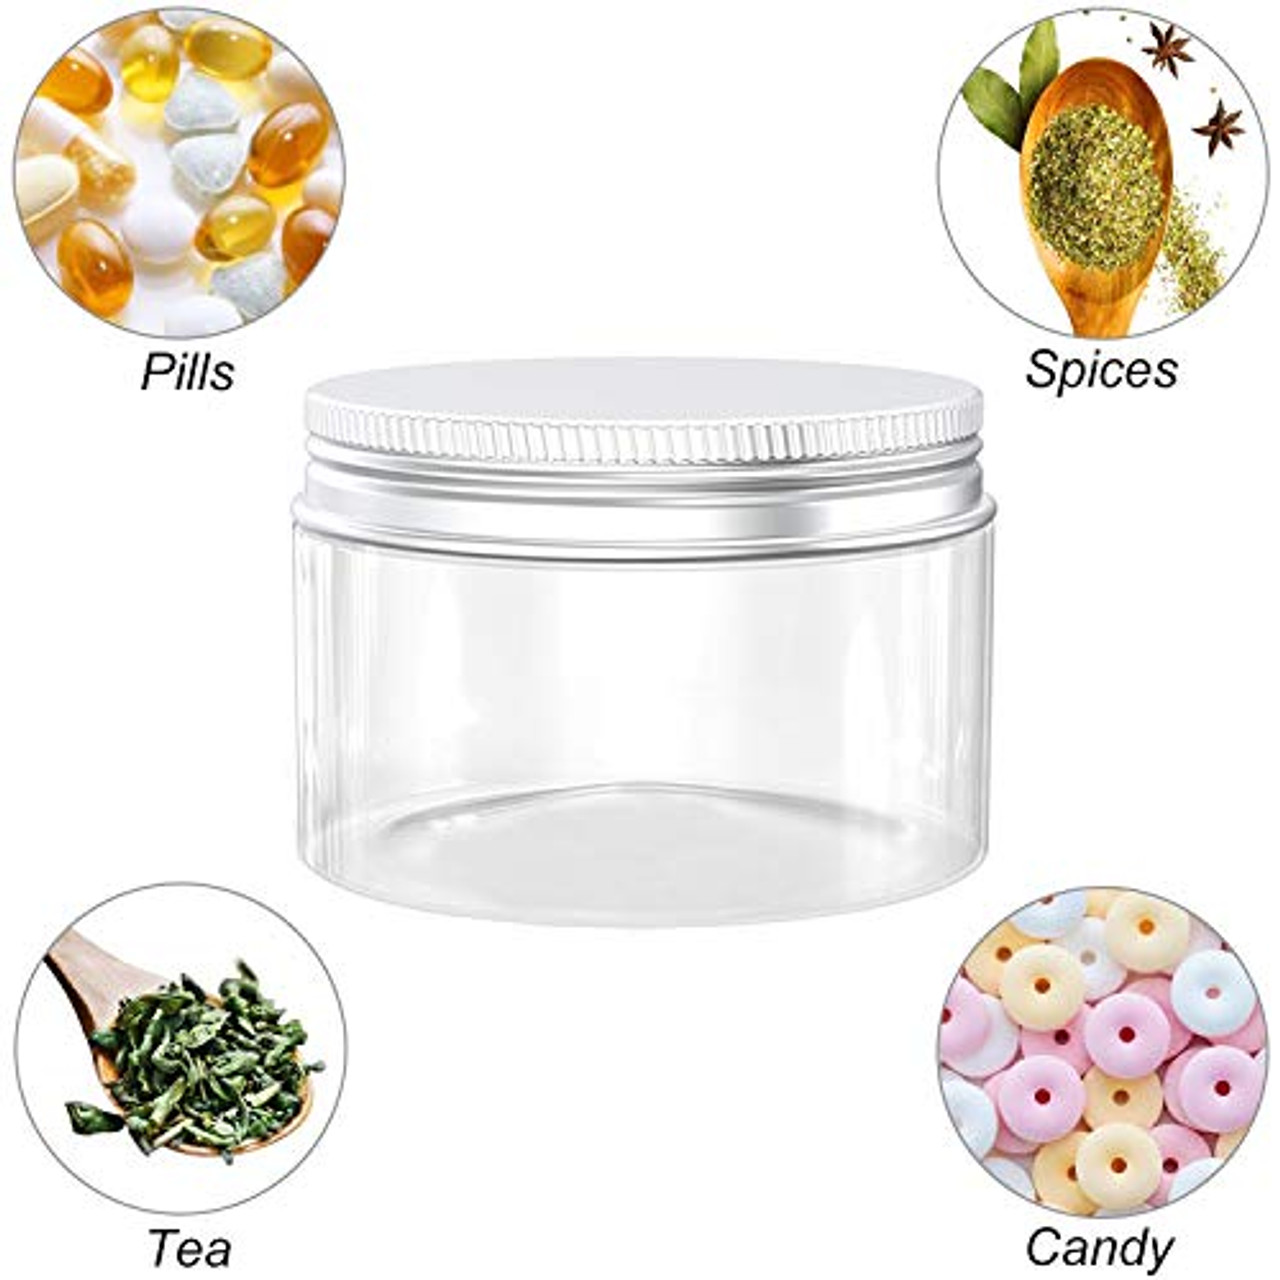 Thenshop 36 Pieces 10 oz Clear Plastic Jars Wide Mouth Empty Mason Jars  Containers with Ribbed Lids Food Airtight Plastic Jars Leak Proof Storage